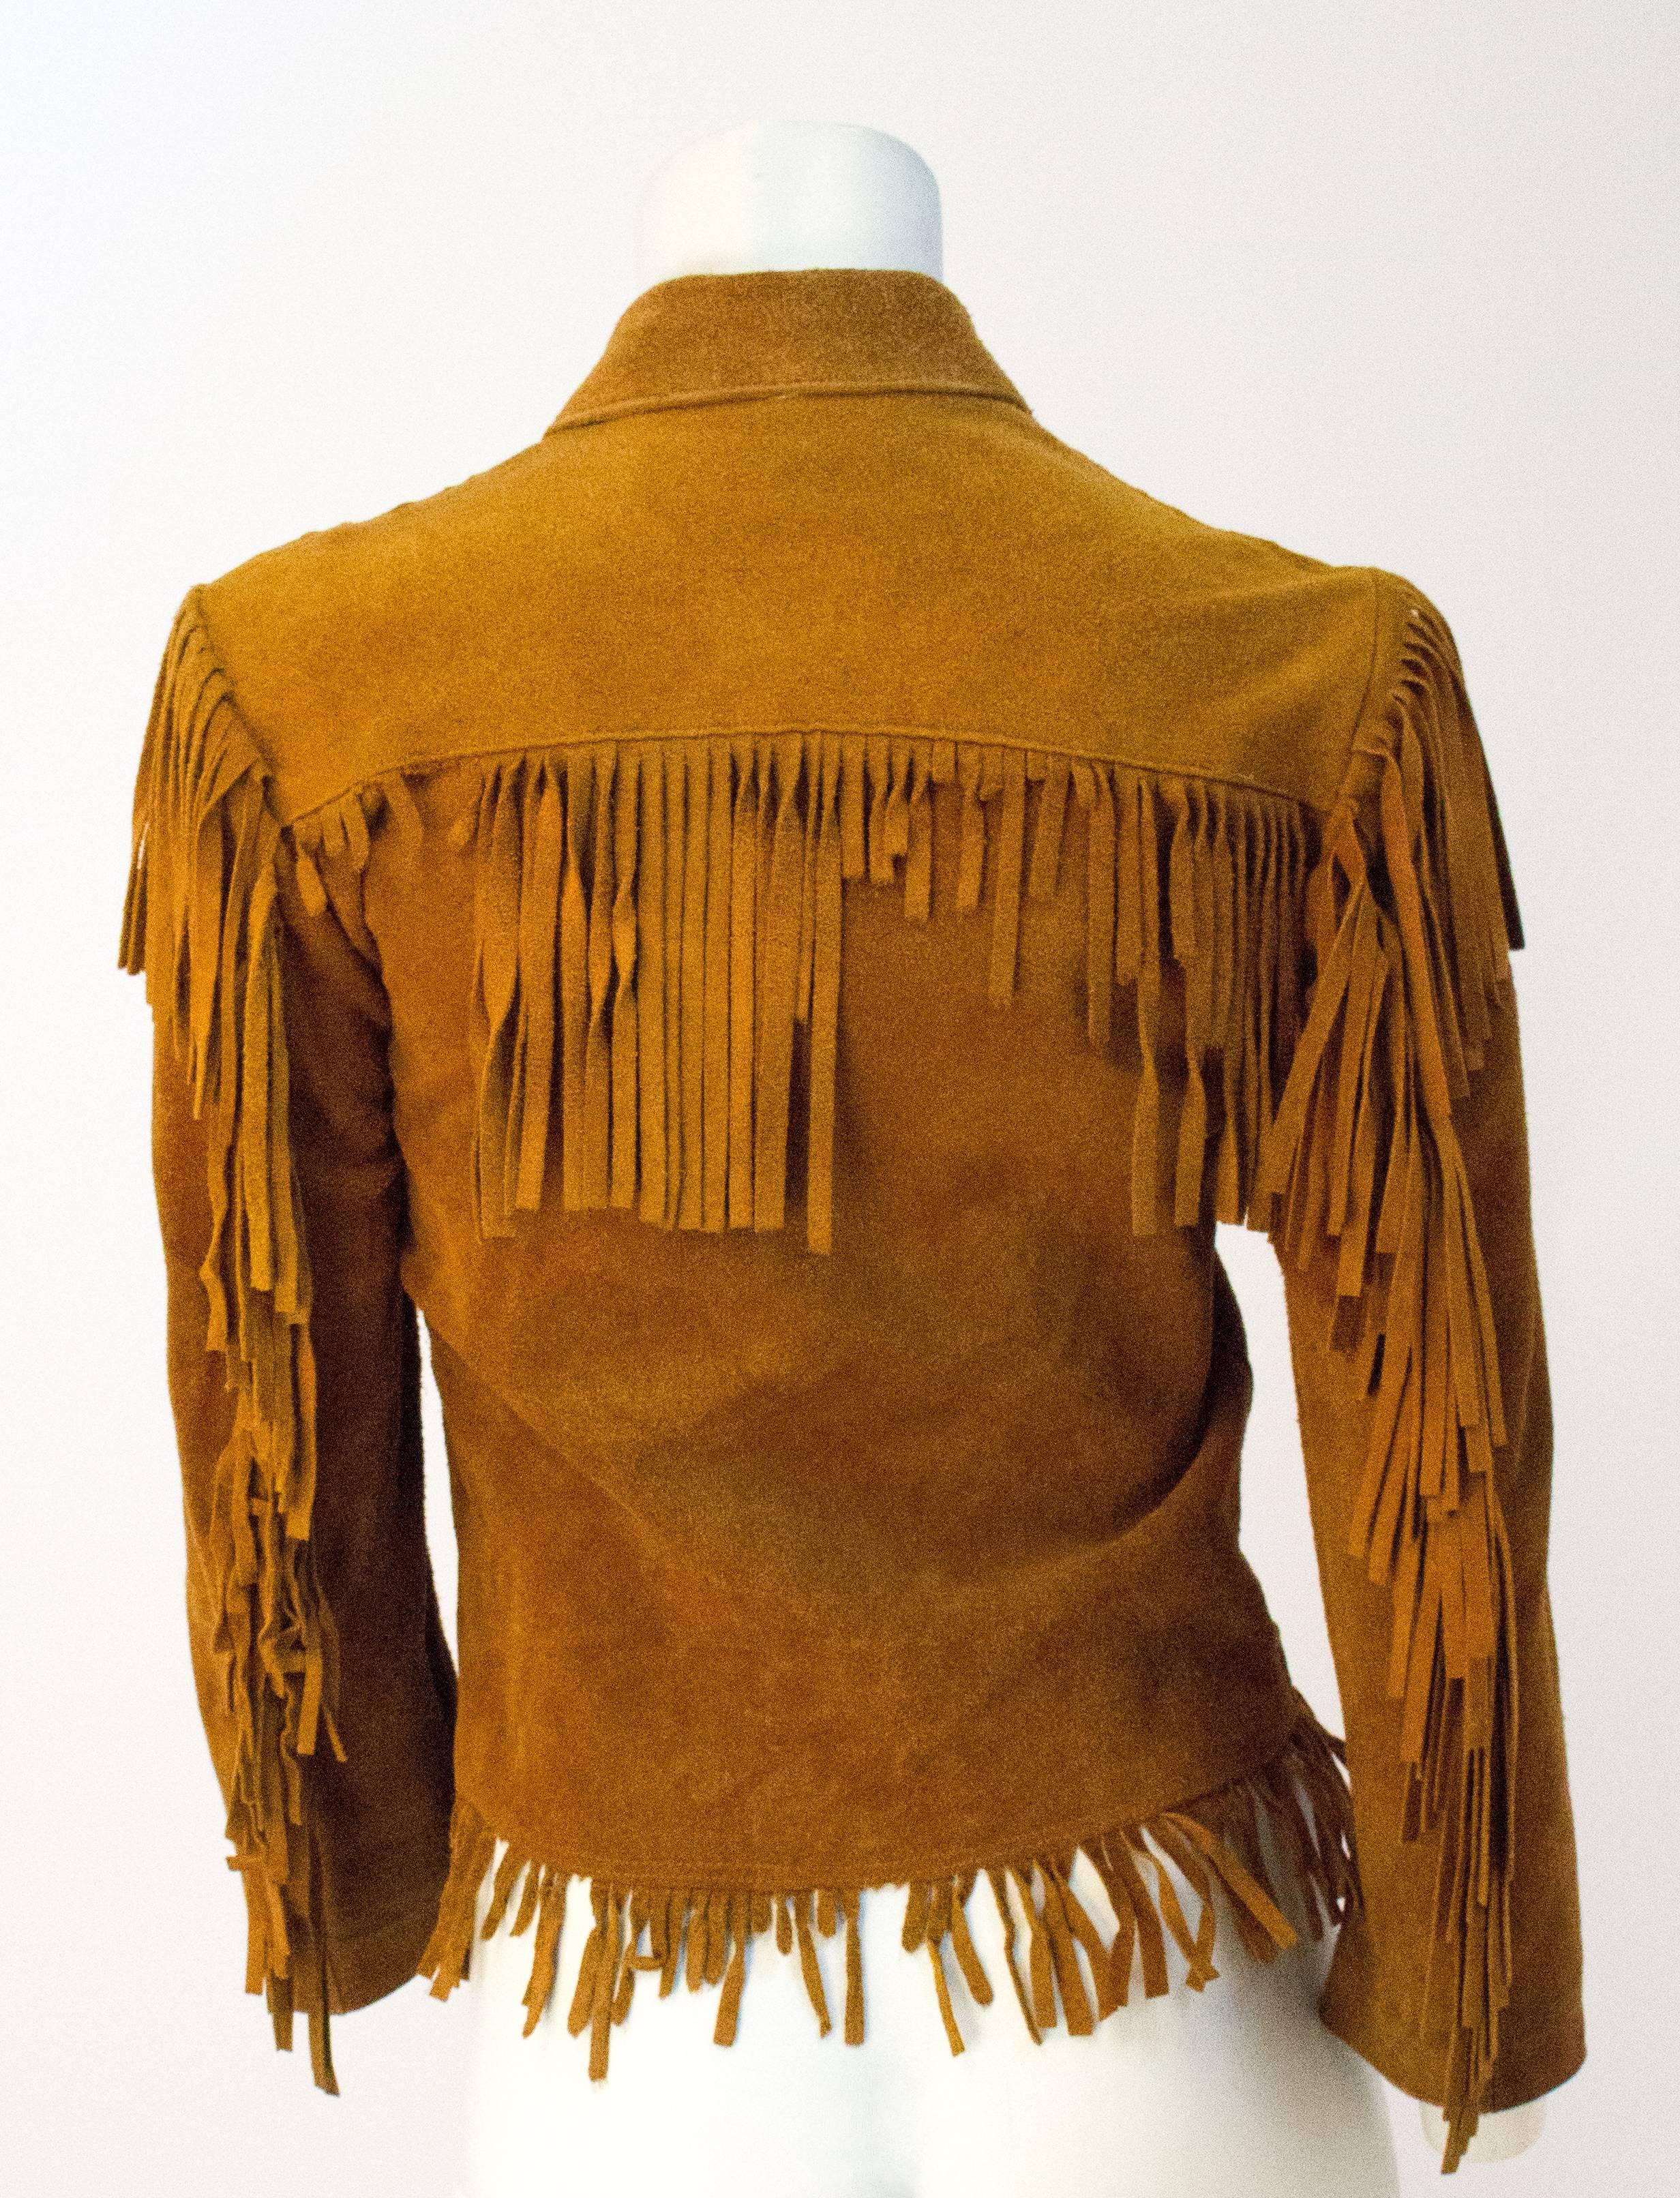 60s Small Suede Western Fringe Jacket. Snaps up the front. Two patch pockets. 